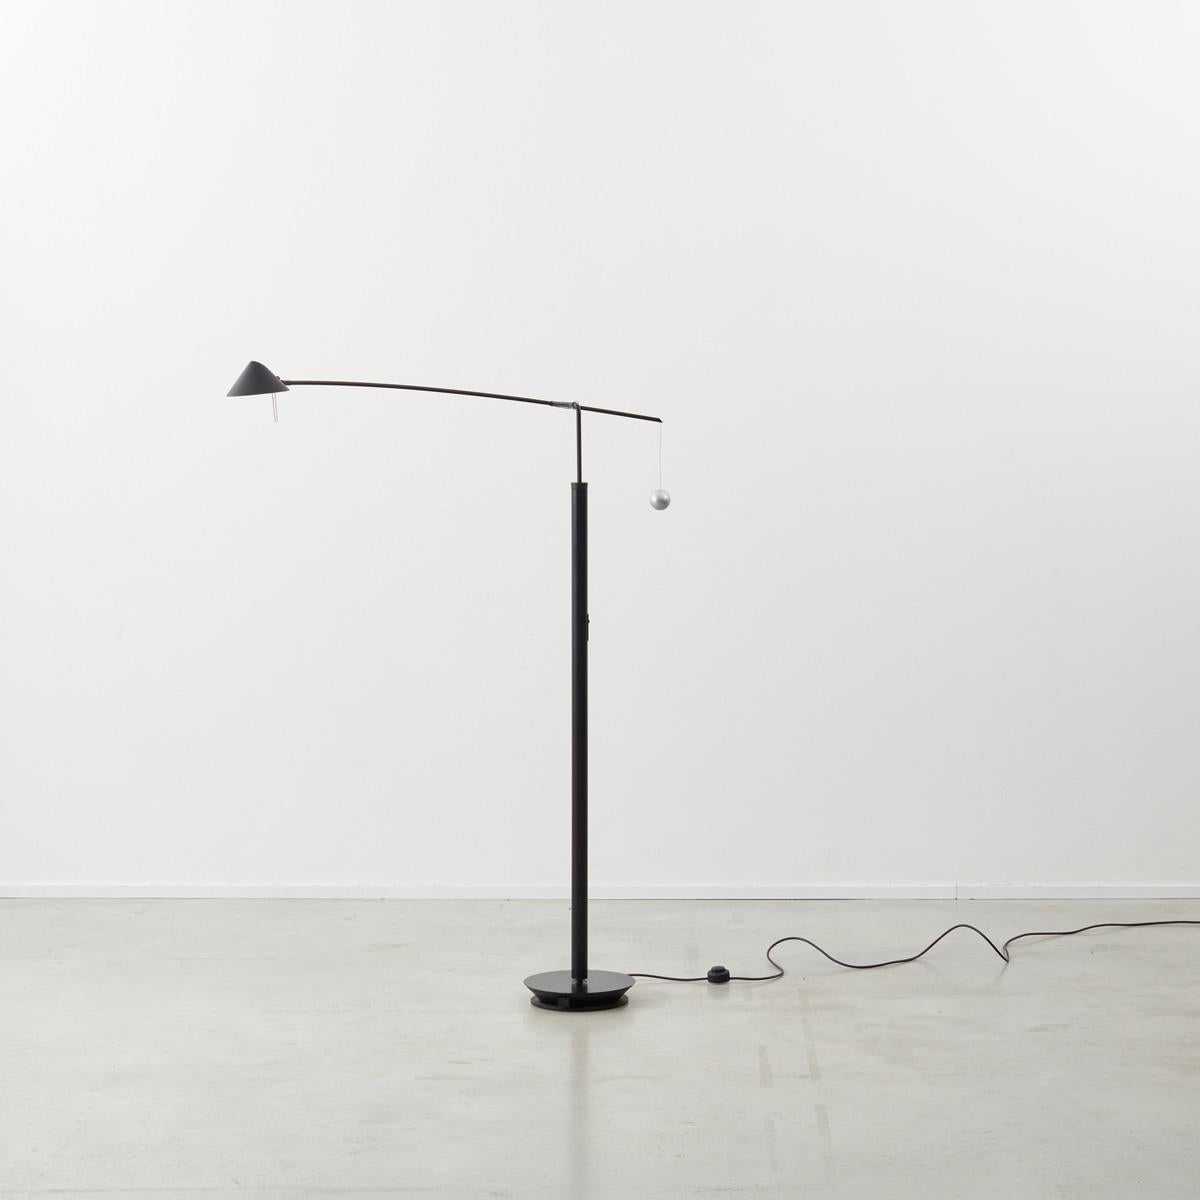 Carlo Forcolini Nestor counterbalanced halogen floor lamp with swivel arm. Produced by the prolific Italian manufacturer Artemide. In good all round condition with a repair to the hanging sphere. Rewired and tested.